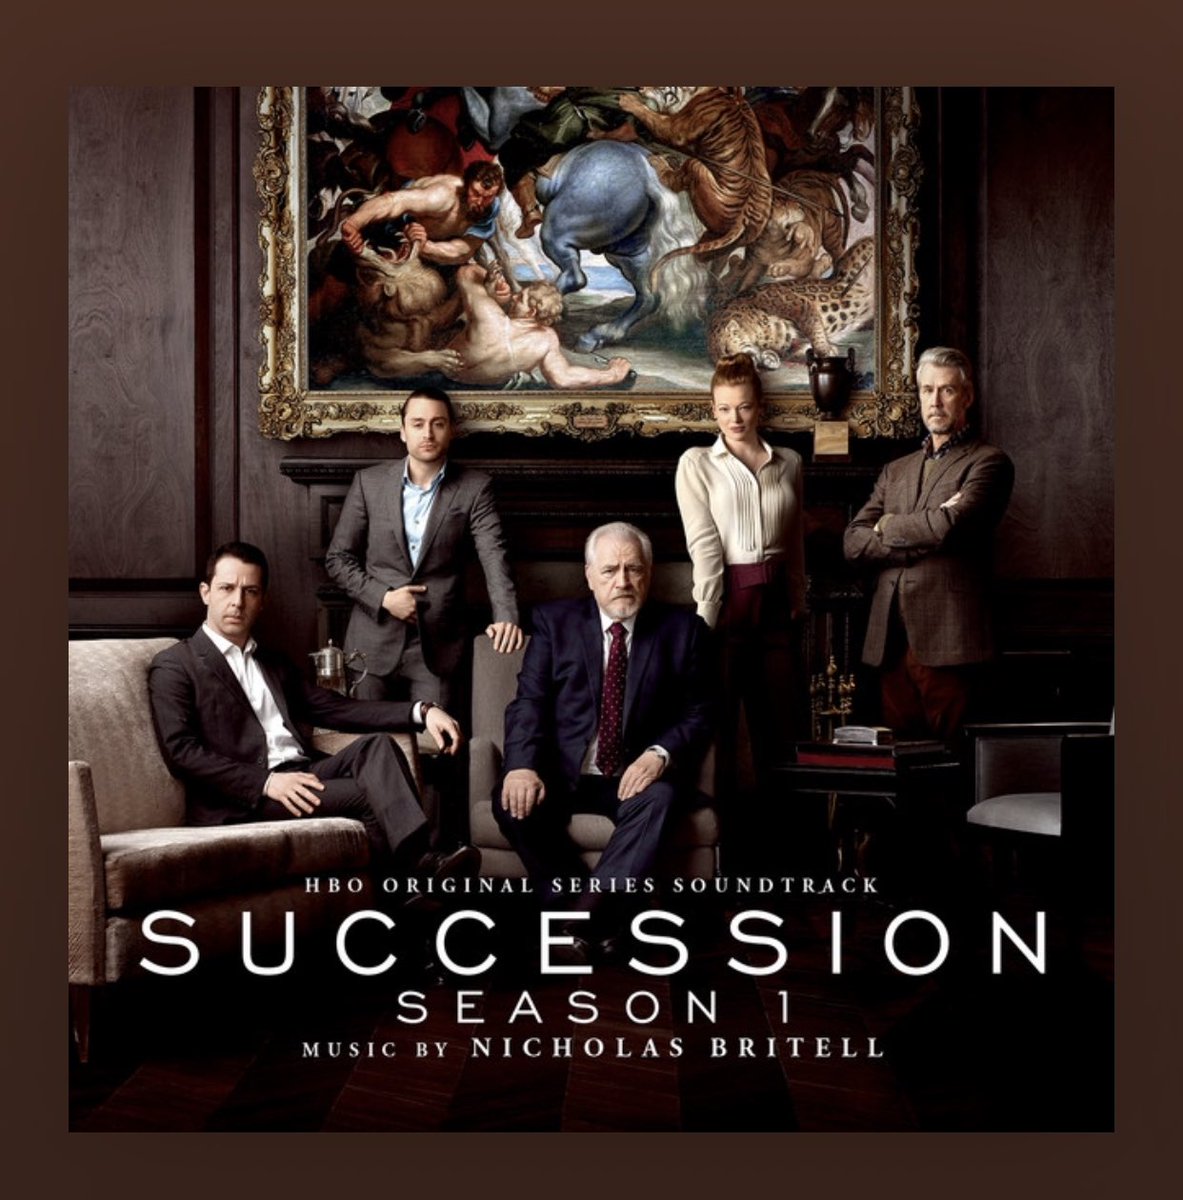 1/ Succession combines dry, cutting humor with a biting critique of wealth and power, weaving a tale that is at once King Lear AND Arrested Development.But even on this star-studded show, the score by Academy Award-nominated composer Nicholas Britell really shines through: